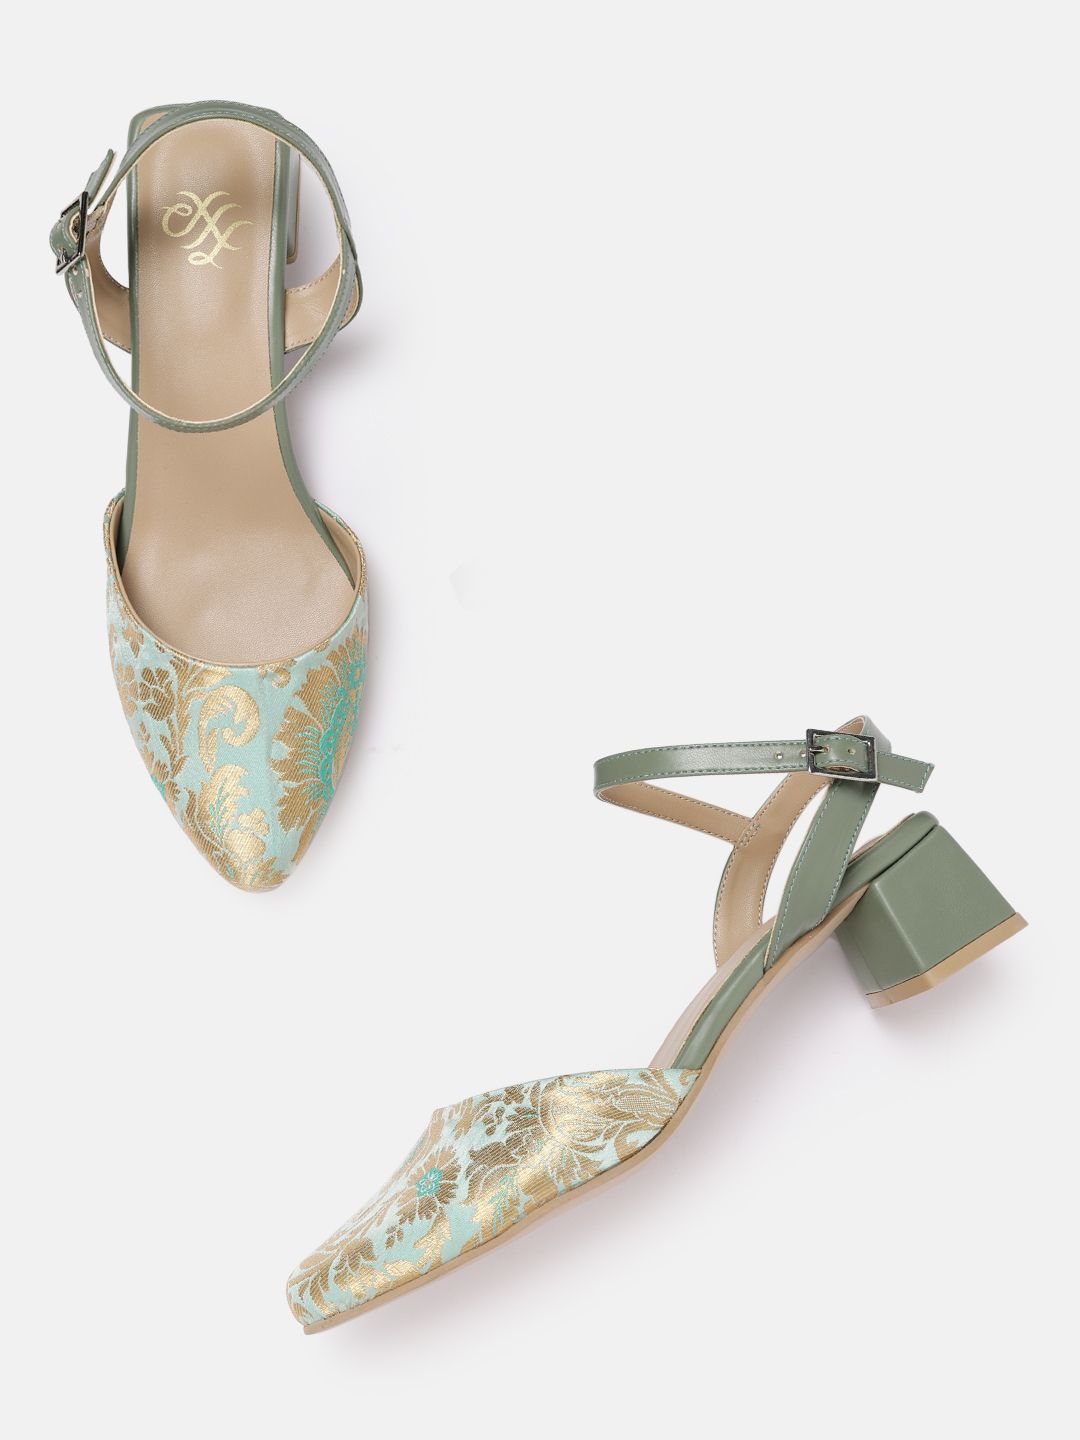 House of Pataudi Women Sea Green & Gold-Toned Woven Design Handcrafted Pumps Price in India